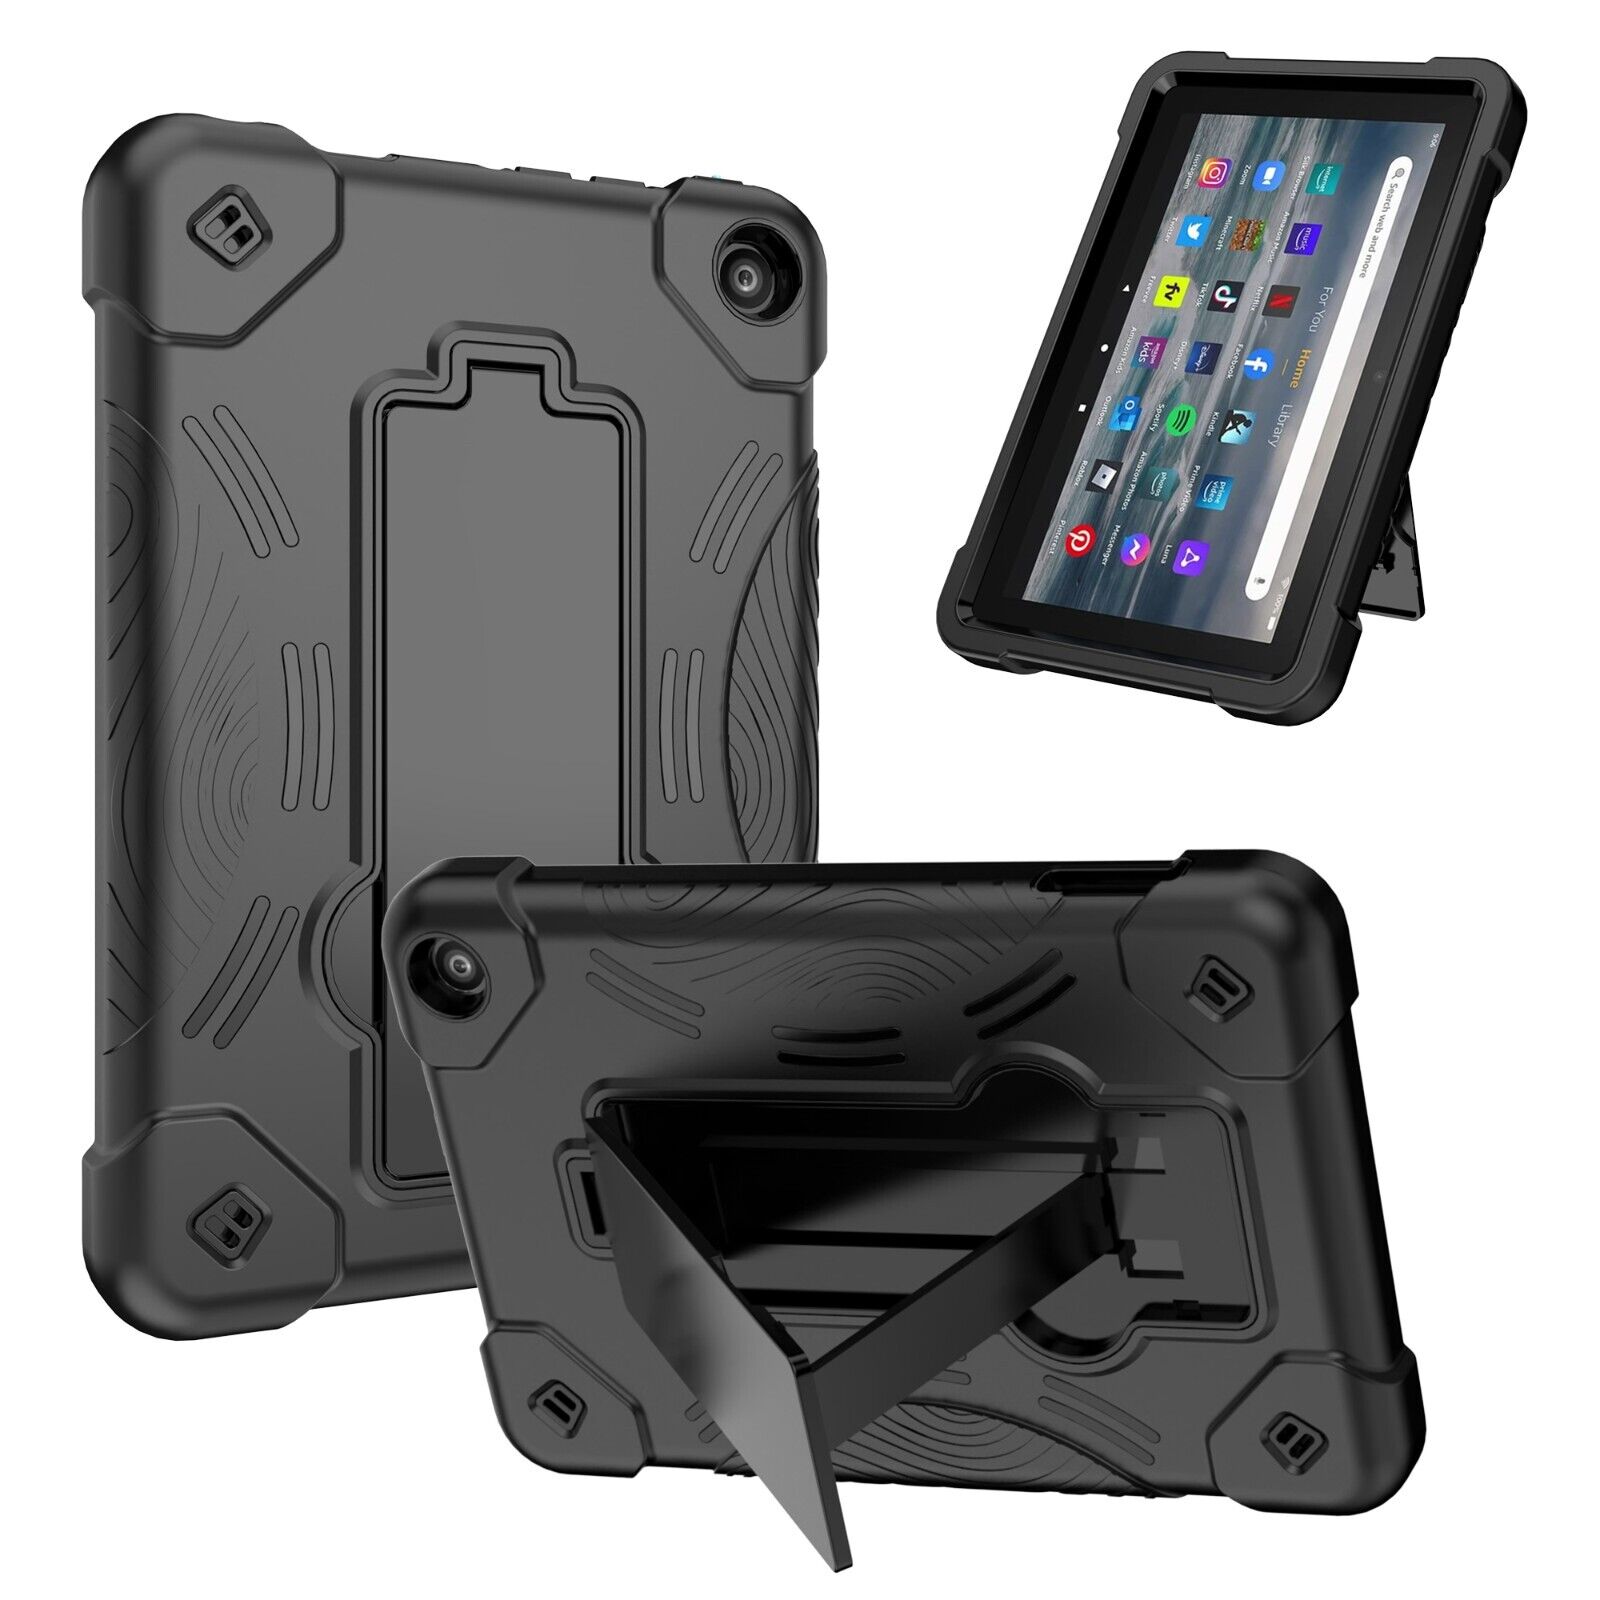 Dual Hybrid Shockproof Rugged Case For Amazon Kindle Fire 7 Tablet 12th Gen 2022